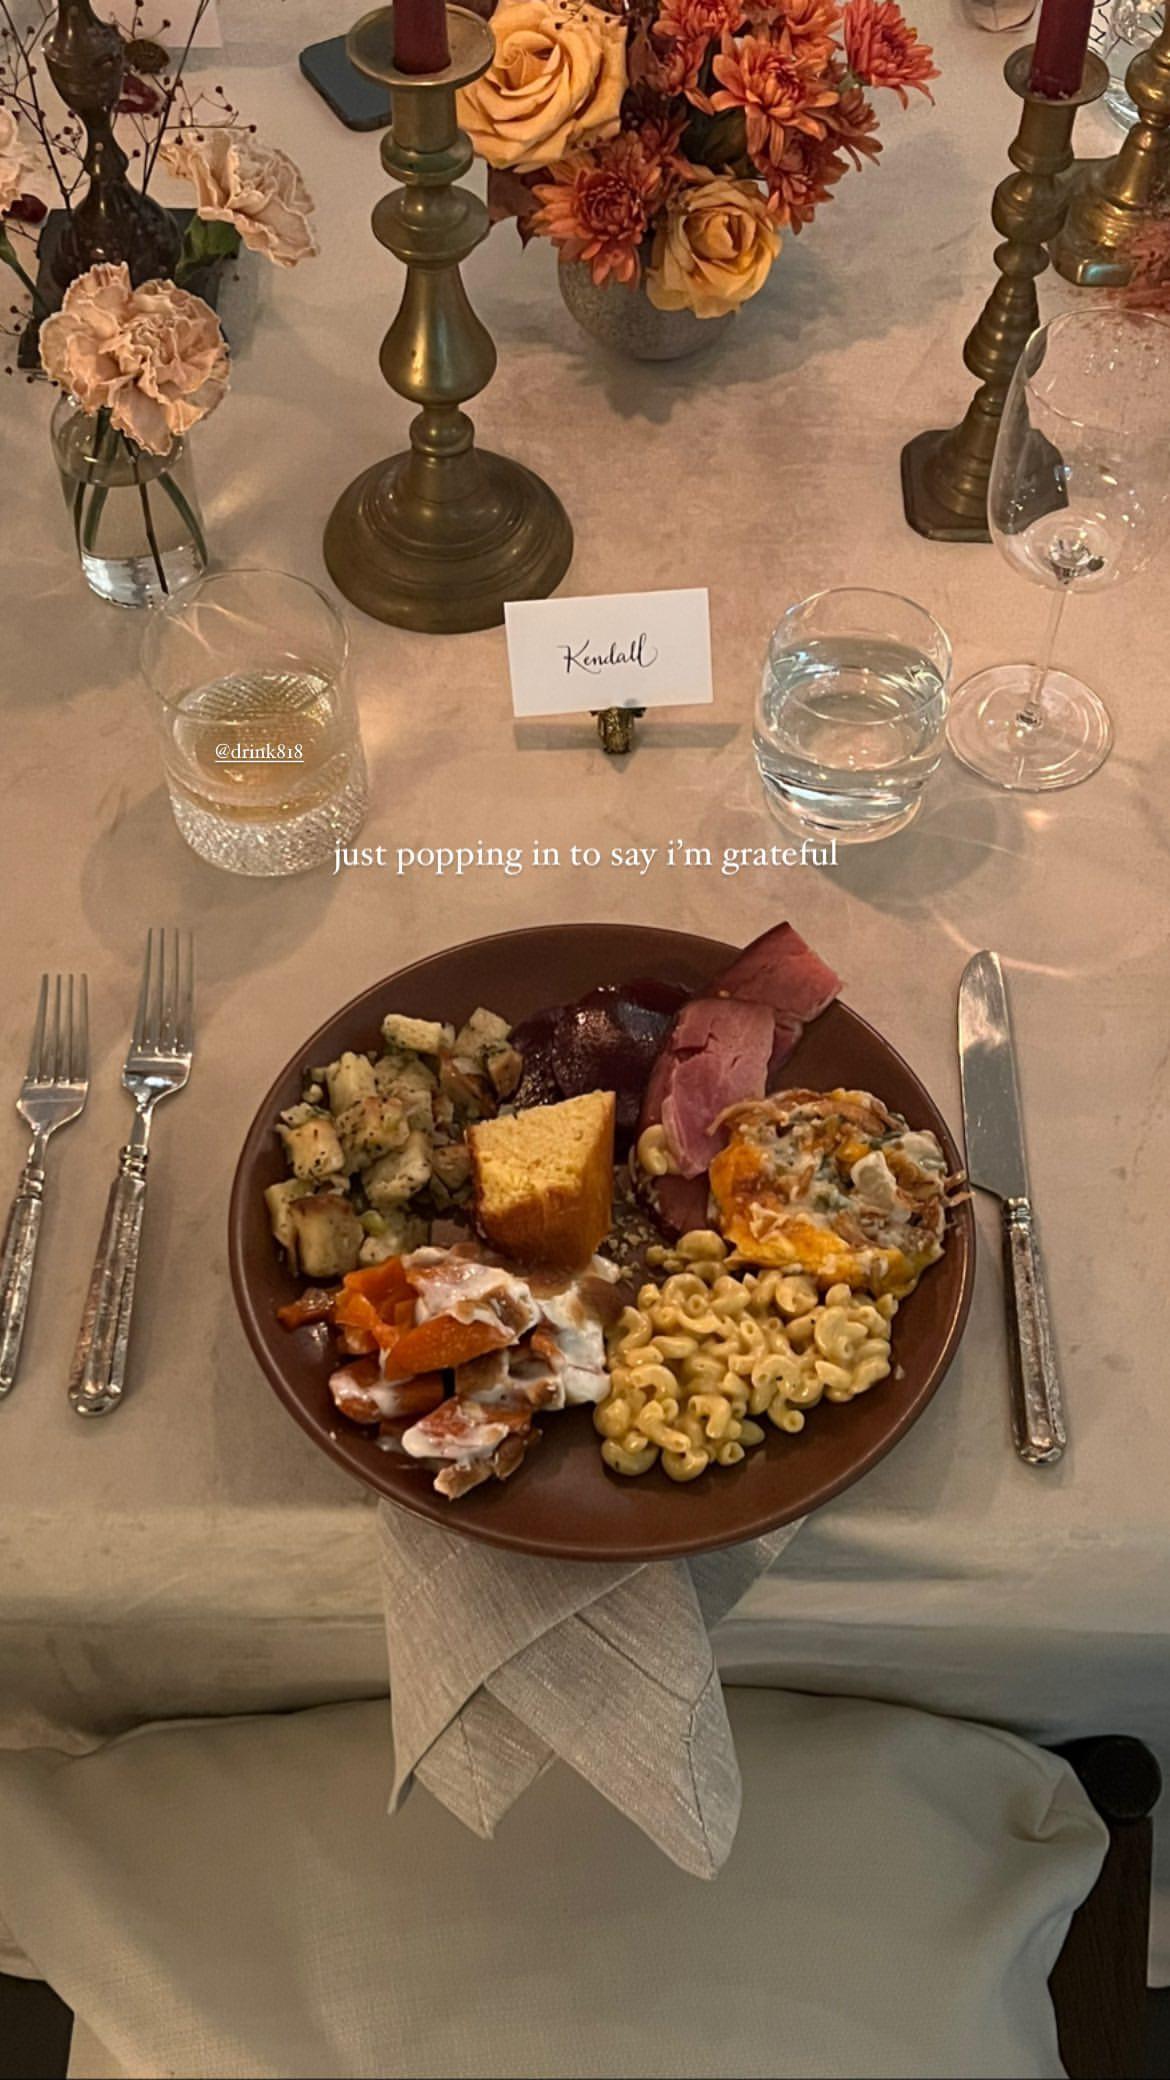 No Low Vibrational Plates Over Here, This Is What Celebs Are Dining On This Thanksgiving